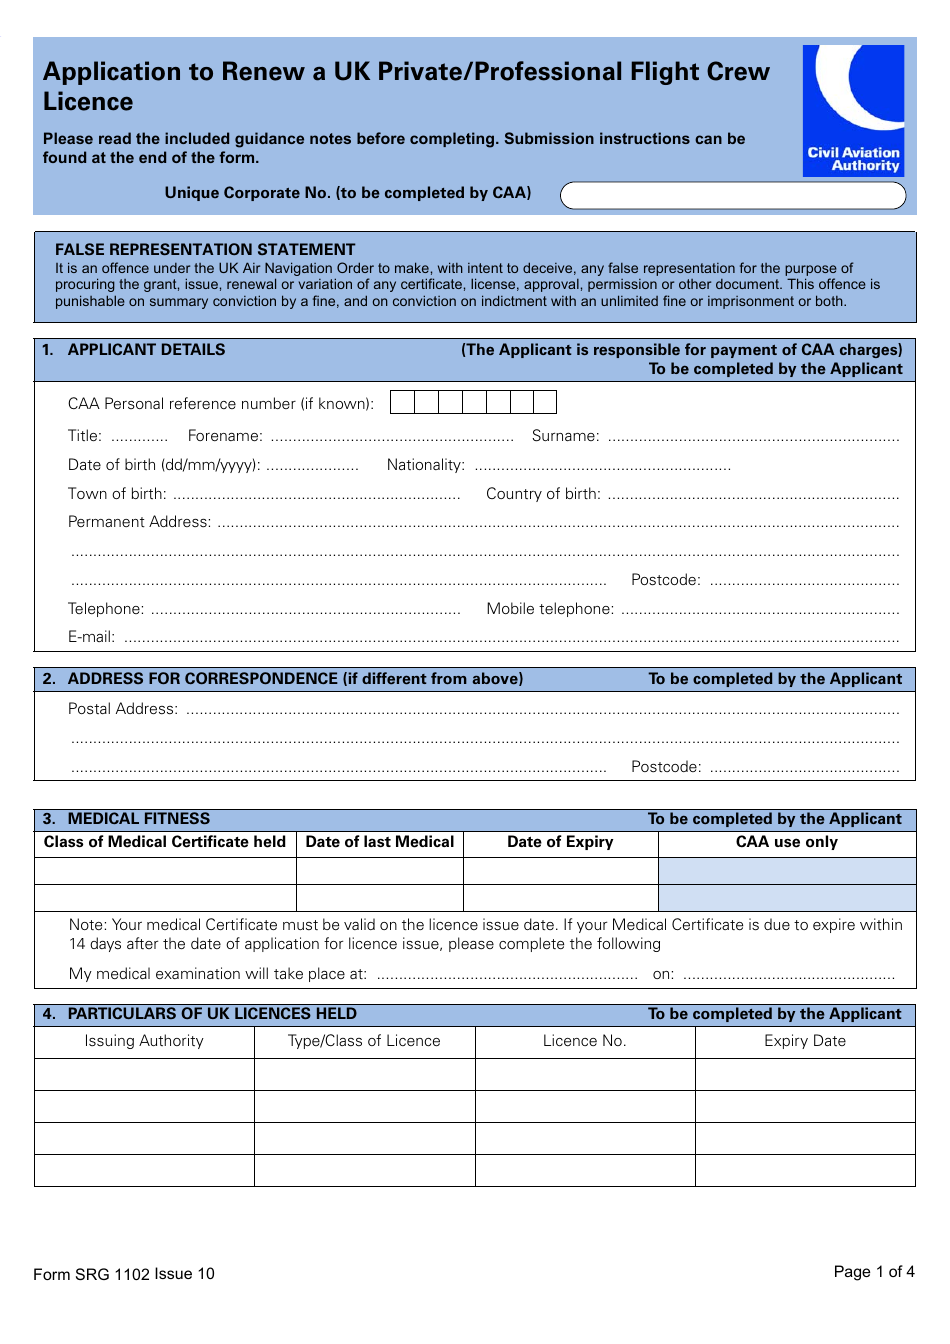 Form SRG1102 Application to Renew a UK Private / Professional Flight Crew Licence - United Kingdom, Page 1